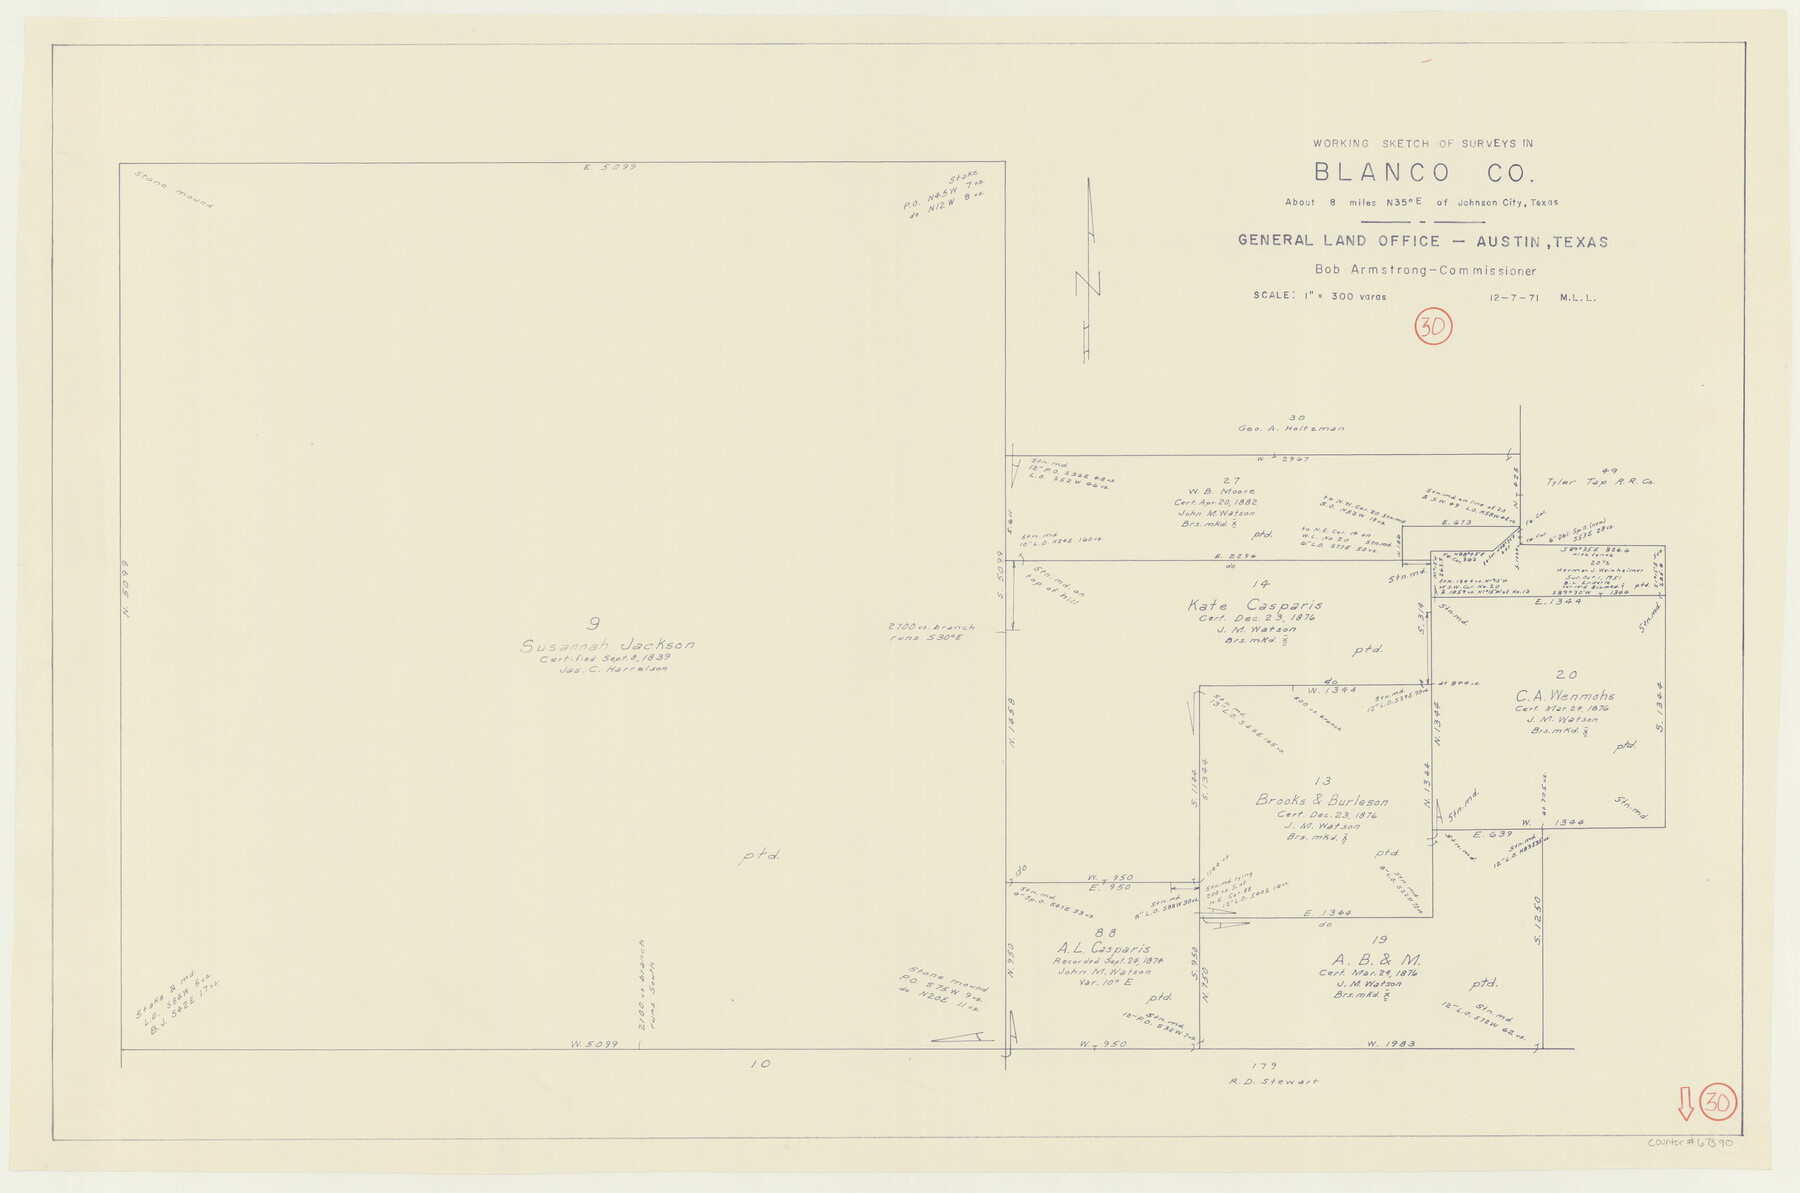 67390, Blanco County Working Sketch 30, General Map Collection